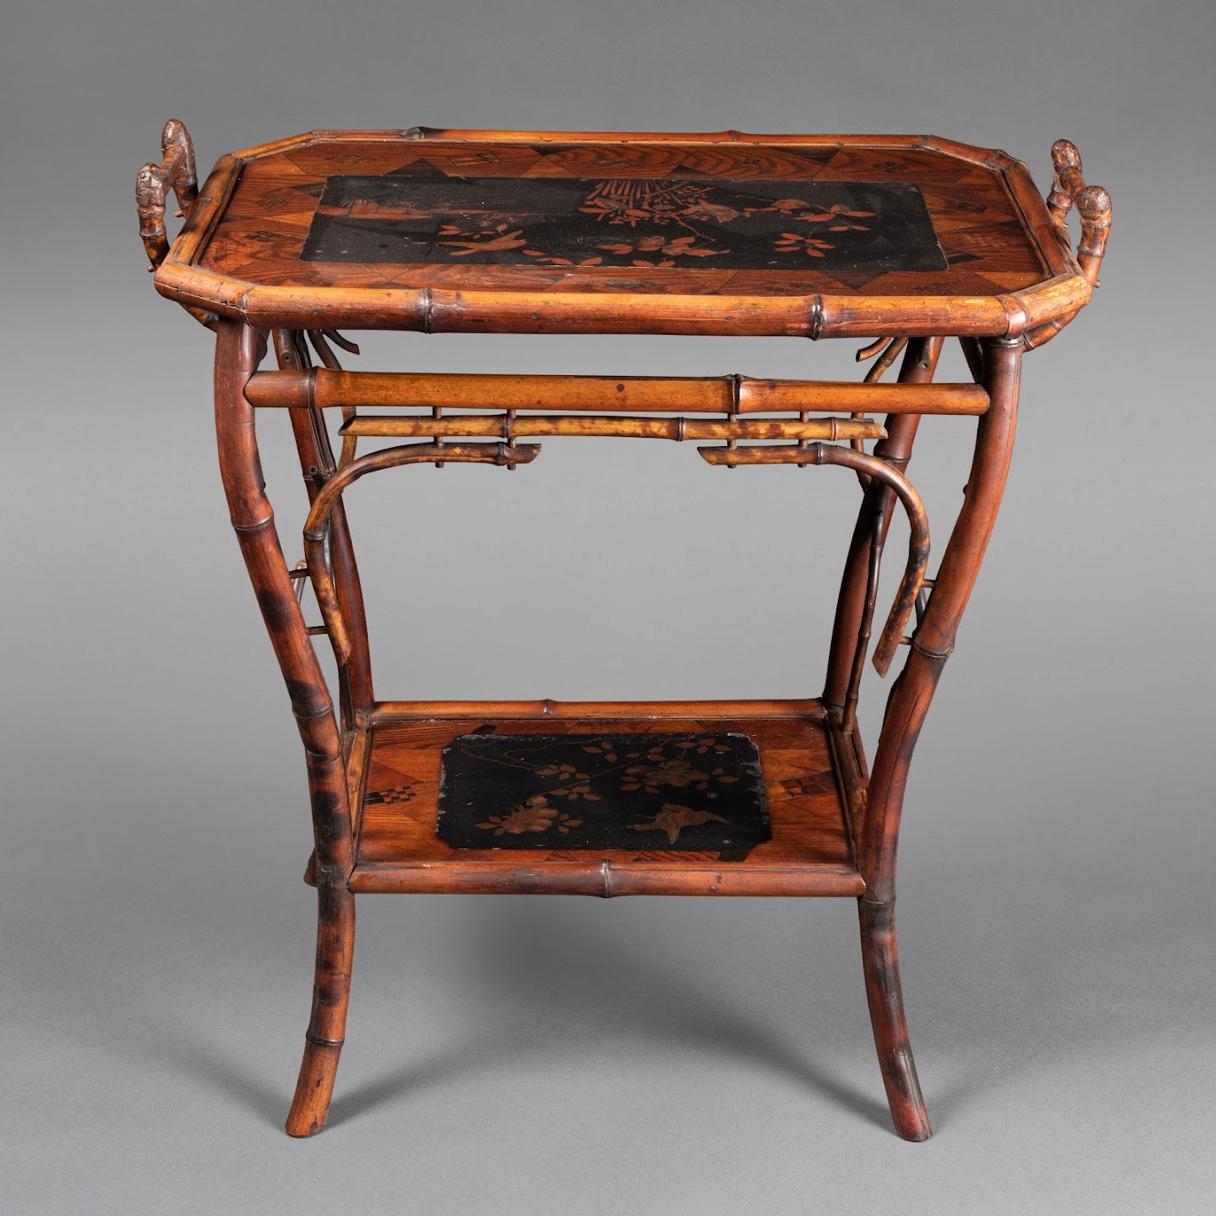 Perret et Vibert bamboo side table. The two trays in bamboo veneer with a black lacquered center. France, circa 1880.